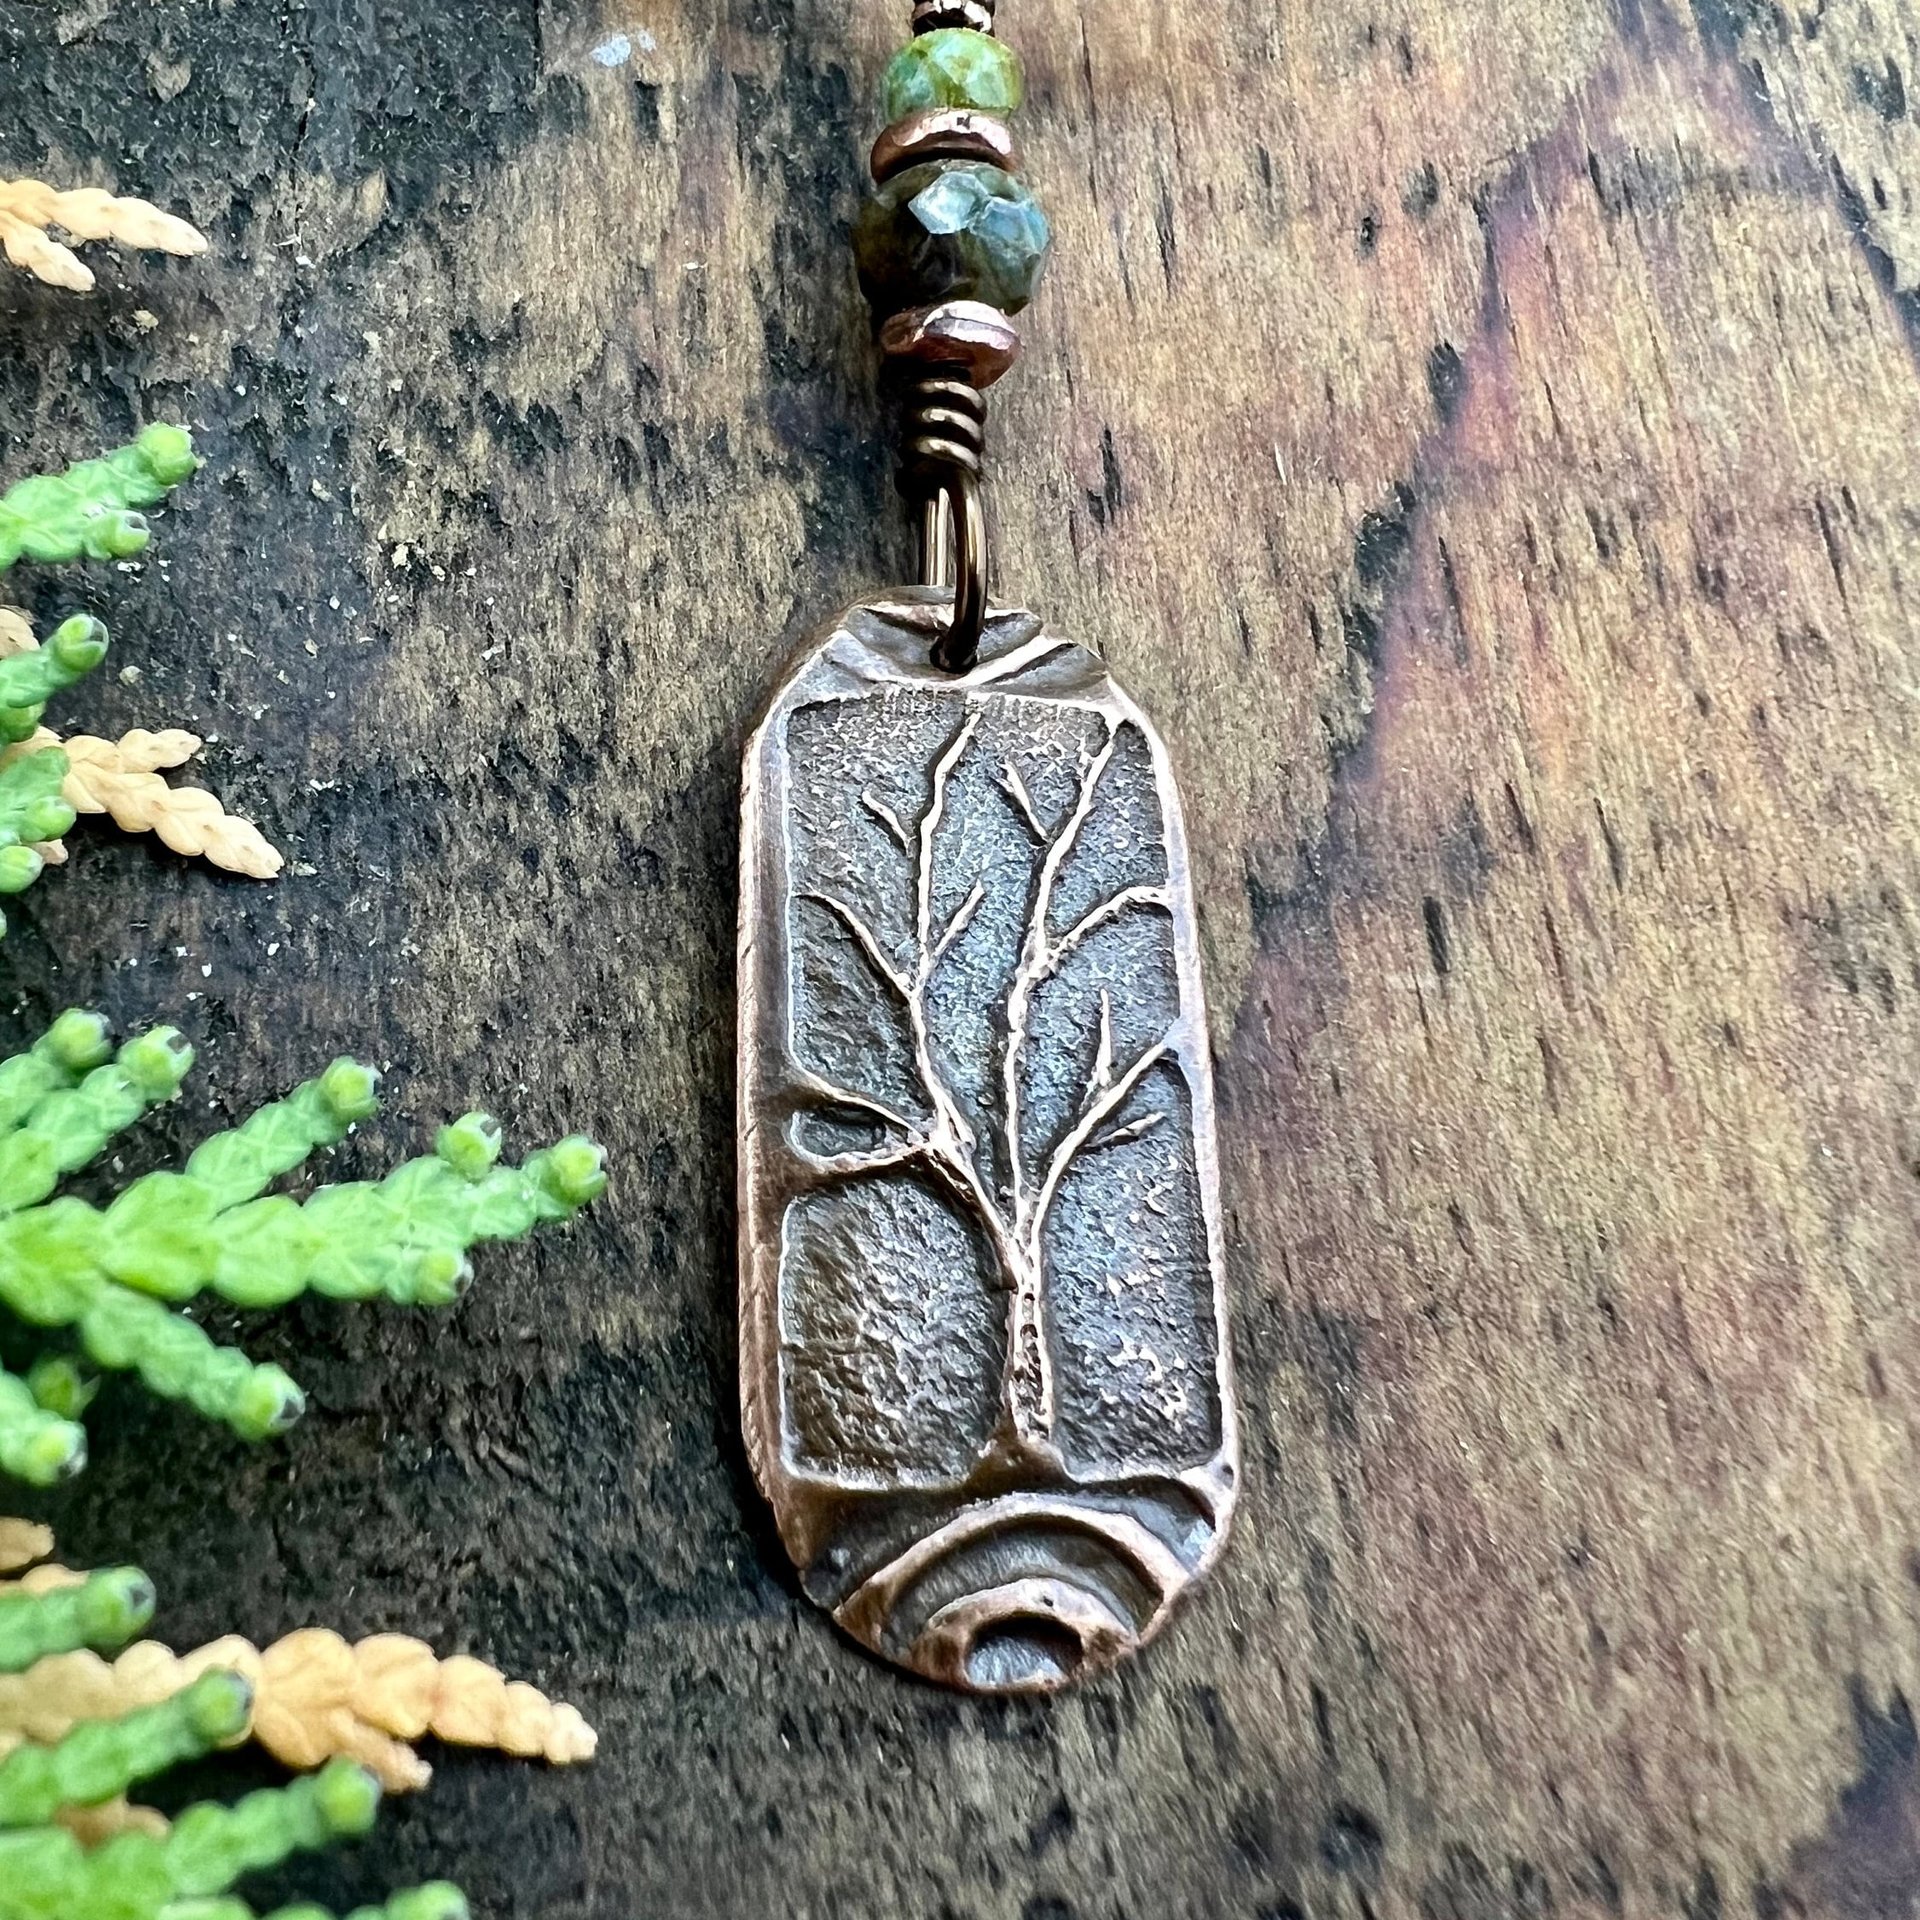 Copper Tree Pendant, Irish Celtic Spirals, One Tree, Czech Glass Beads, Leather & Vegan Cords, Earthy Rustic Jewelry, Tree Branches Roots